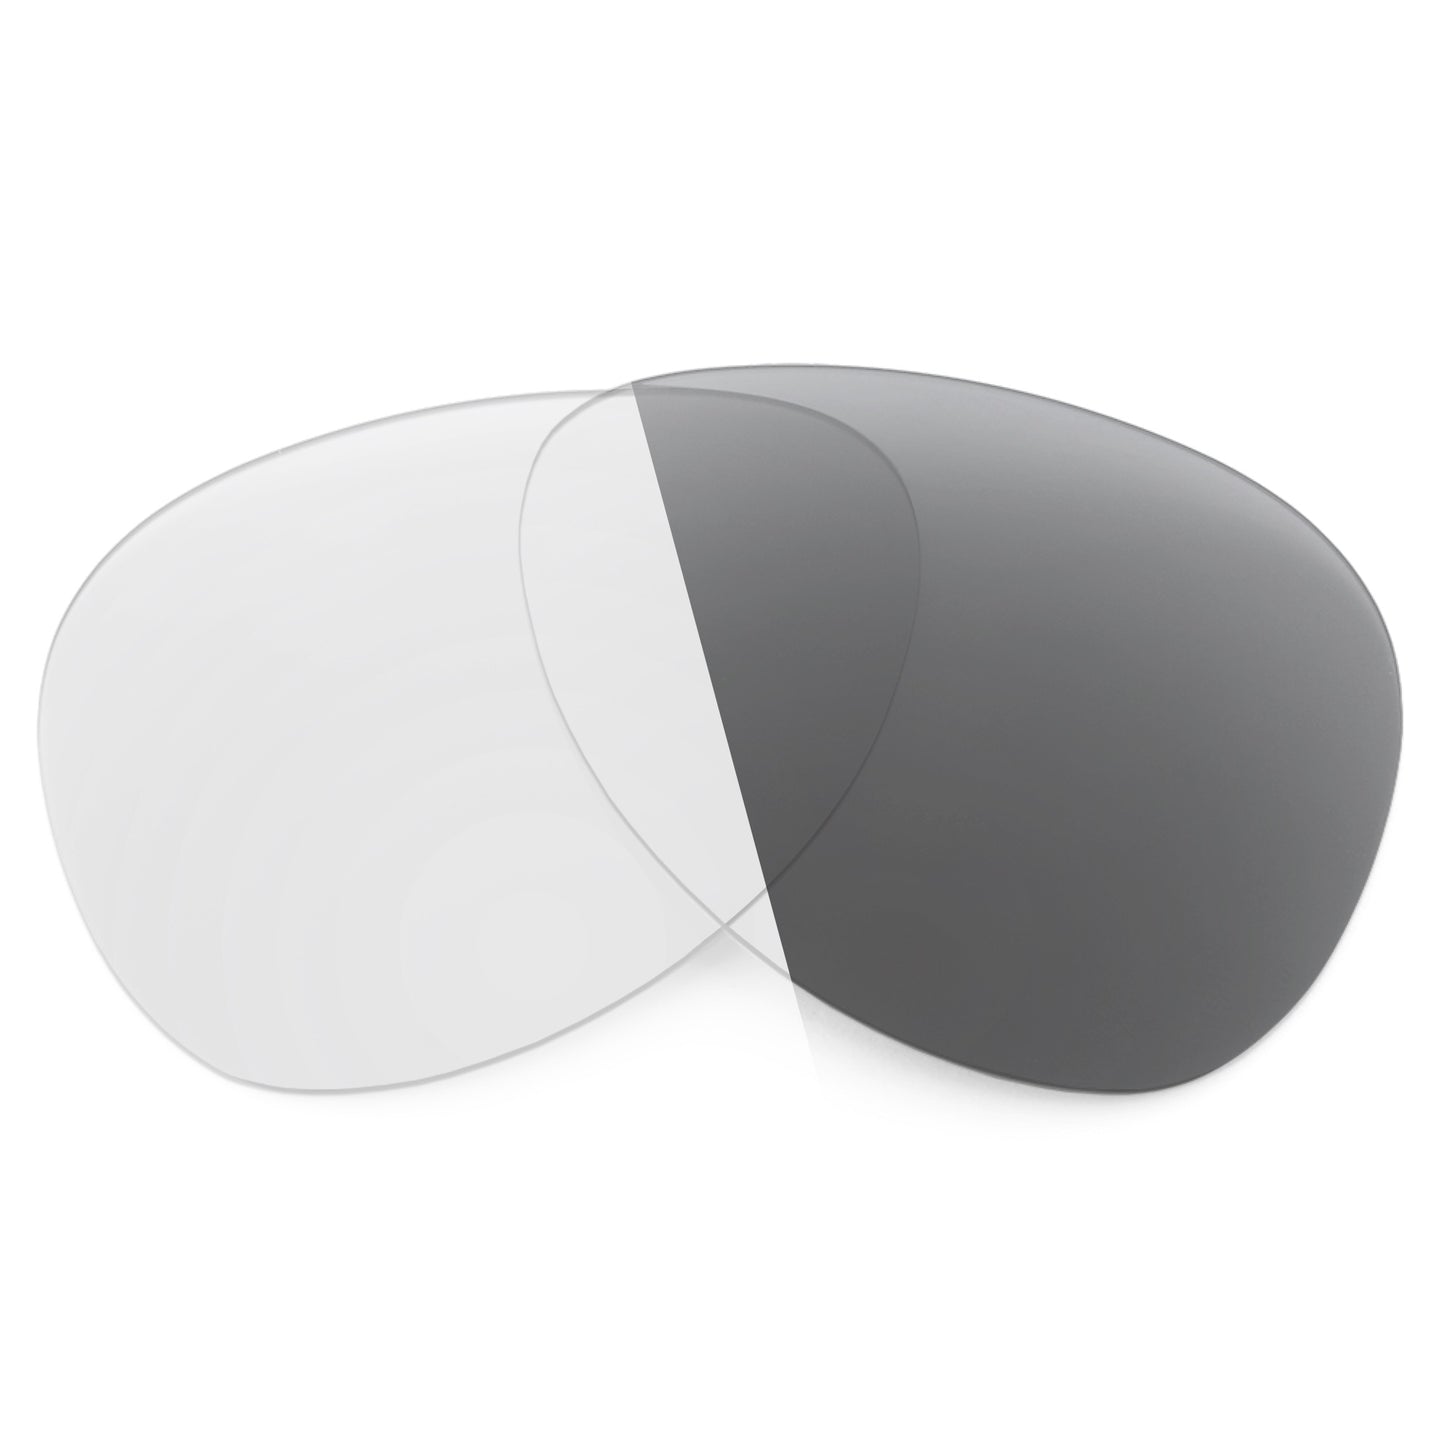 Revant replacement lenses for Oakley Disclosure Non-Polarized Adapt Gray Photochromic